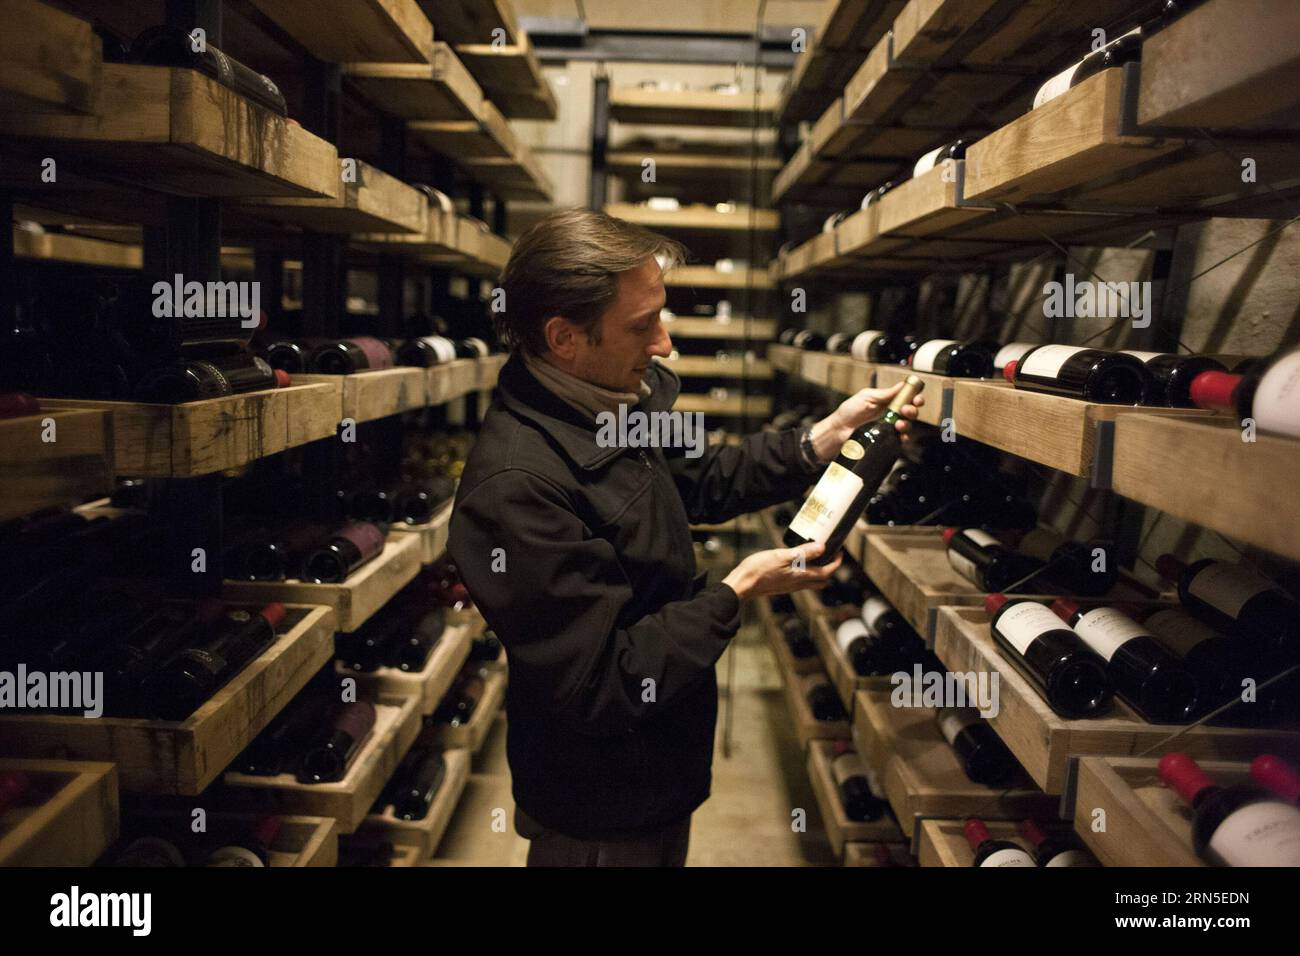 (150623) -- MAIPU, June 23, 2015 -- Image taken on June 22, 2015 shows Gaston Re, sommelier of the wine company Bodegas Trapiche, looking at a bottle of Cabernet Sauvignon 1991 in the cellar of Bodegas Trapiche, in the city of Maipu, Mendoza province, Argentina. Bodegas Trapiche, founded in 1883, is recognized as a pioneer brand in aspects such as the introduction of French vines, the production of varietal wines, the importation of oak barrels from France and the use of stainless steel tanks. According to Valentin Gonzalez, director of the Asian Region of Bodegas Trapiche, the company current Stock Photo